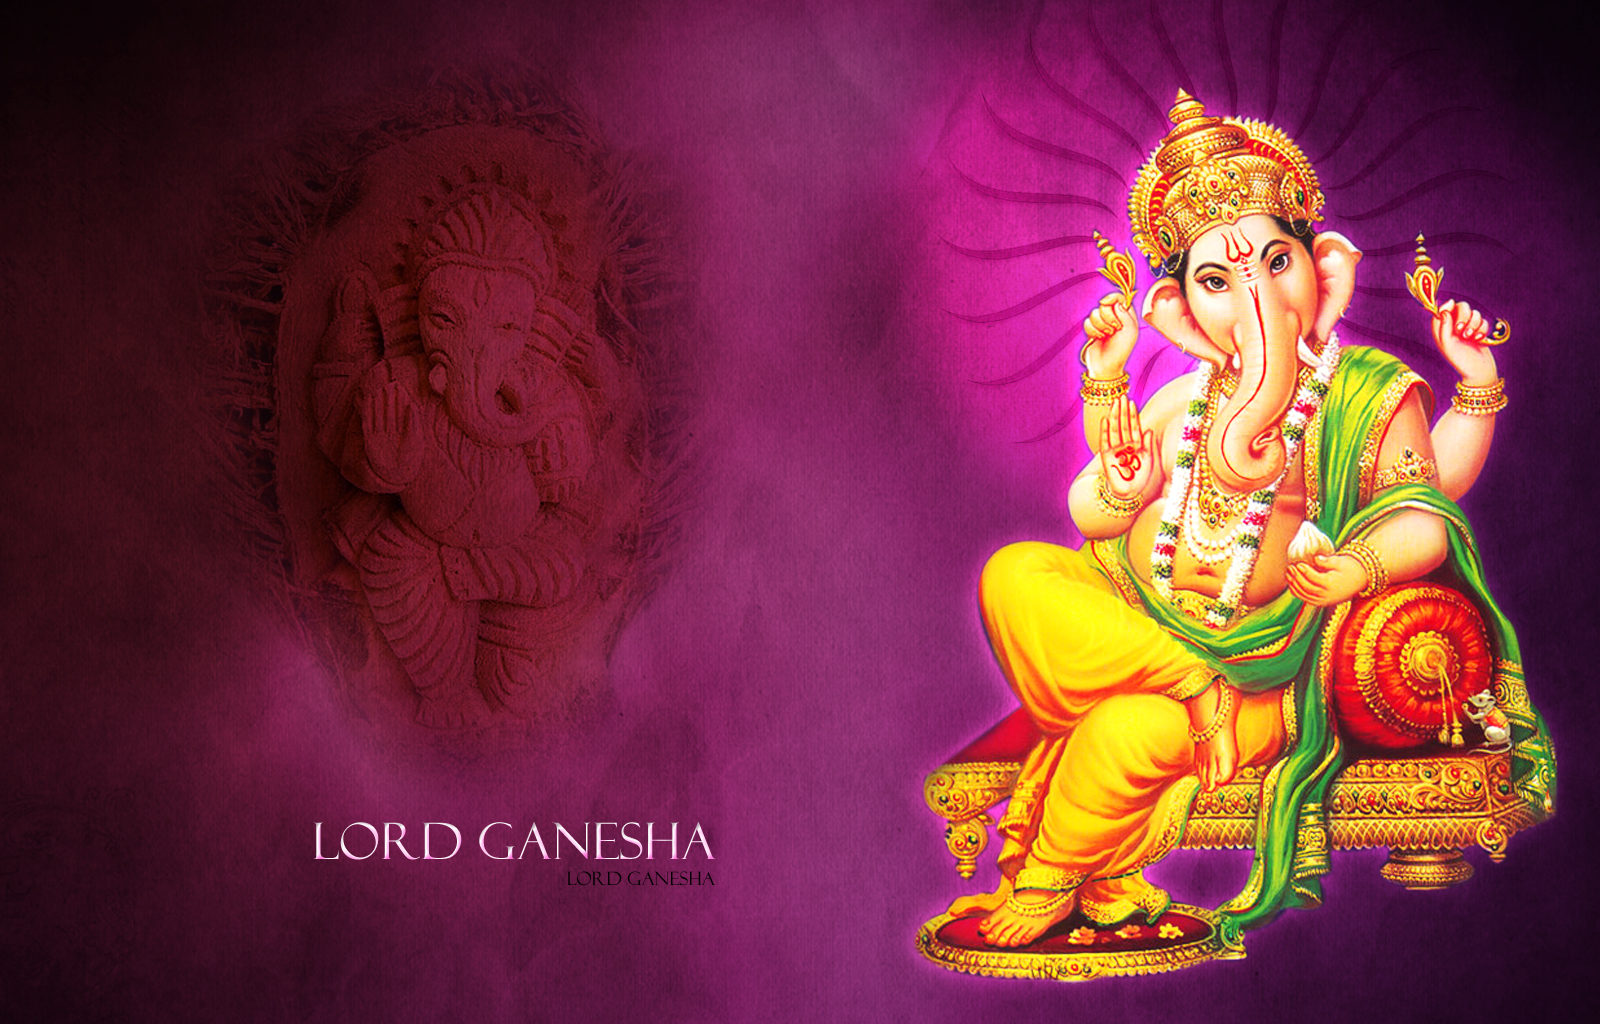 Lord Ganesha Wallpaper Pictures